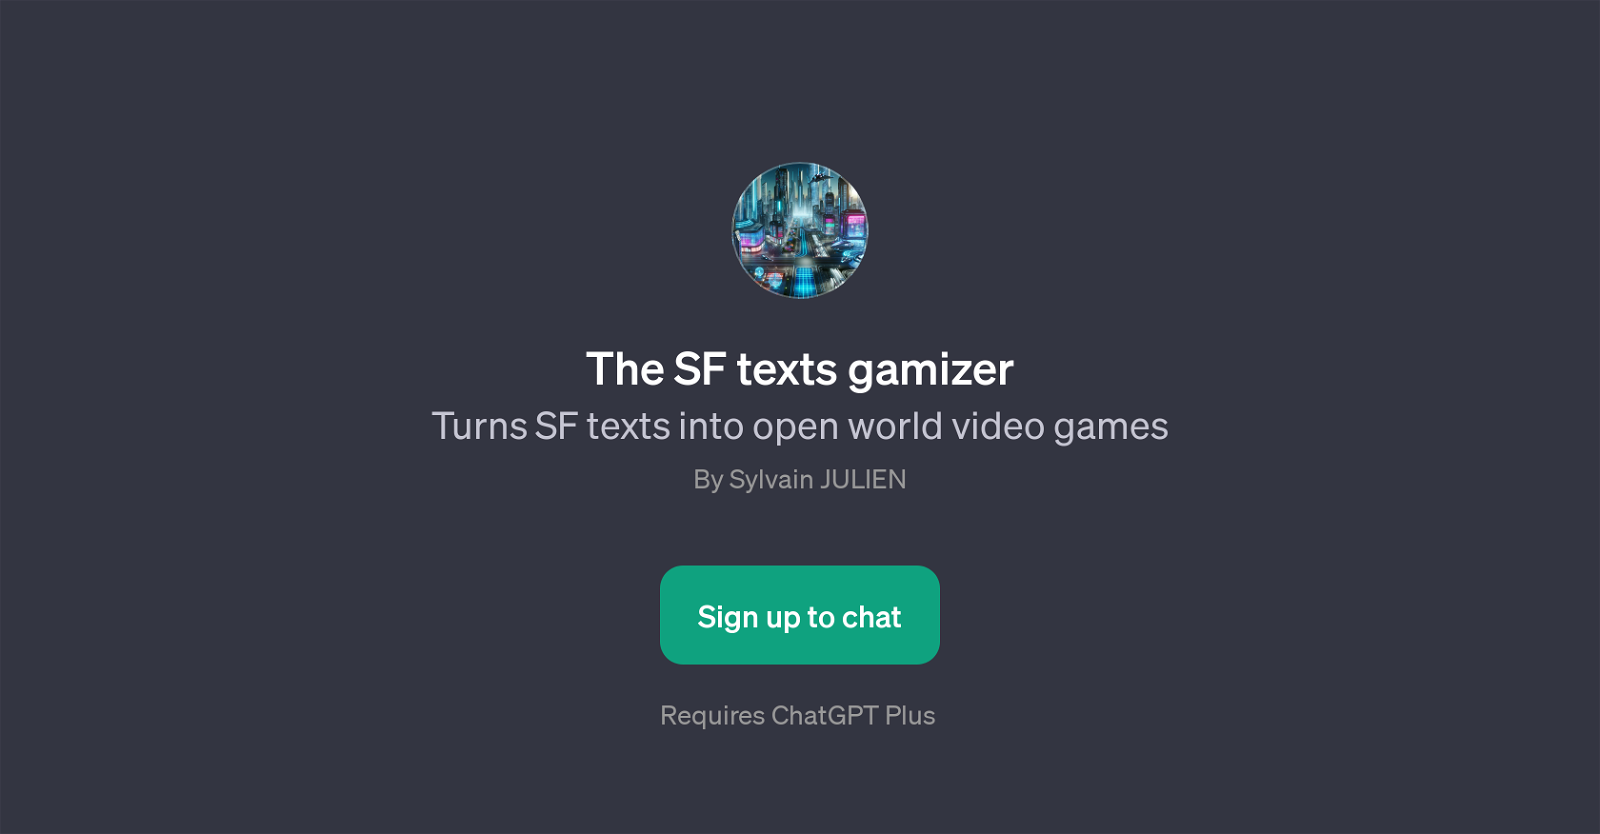 The SF texts gamizer website